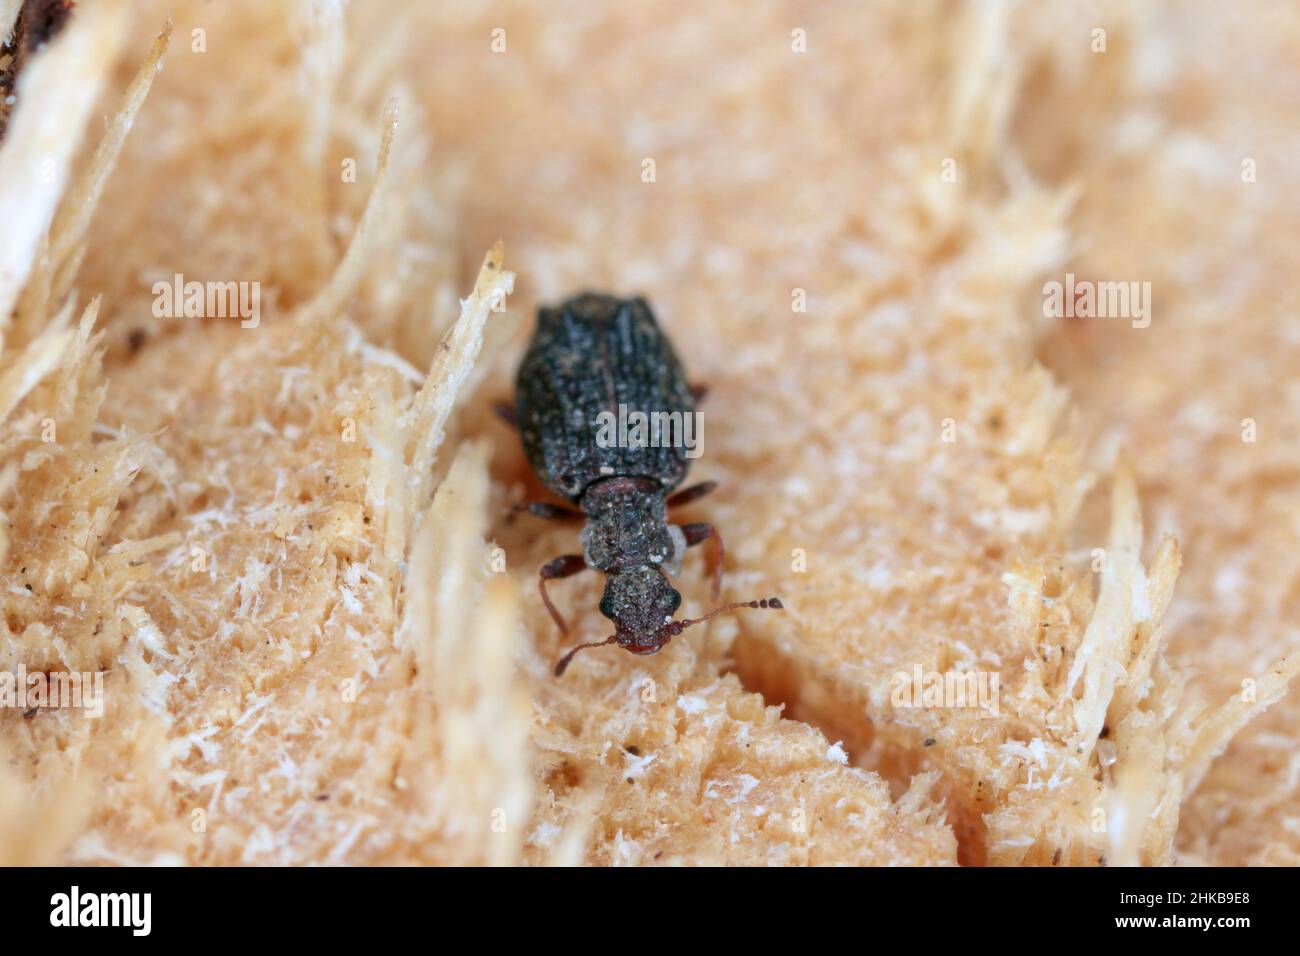 Cartodere nodifer - tiny beetle, about 2mm in the leaf litter. Species of minute brown scavenger beetles native to Australia and New Zealand. Stock Photo